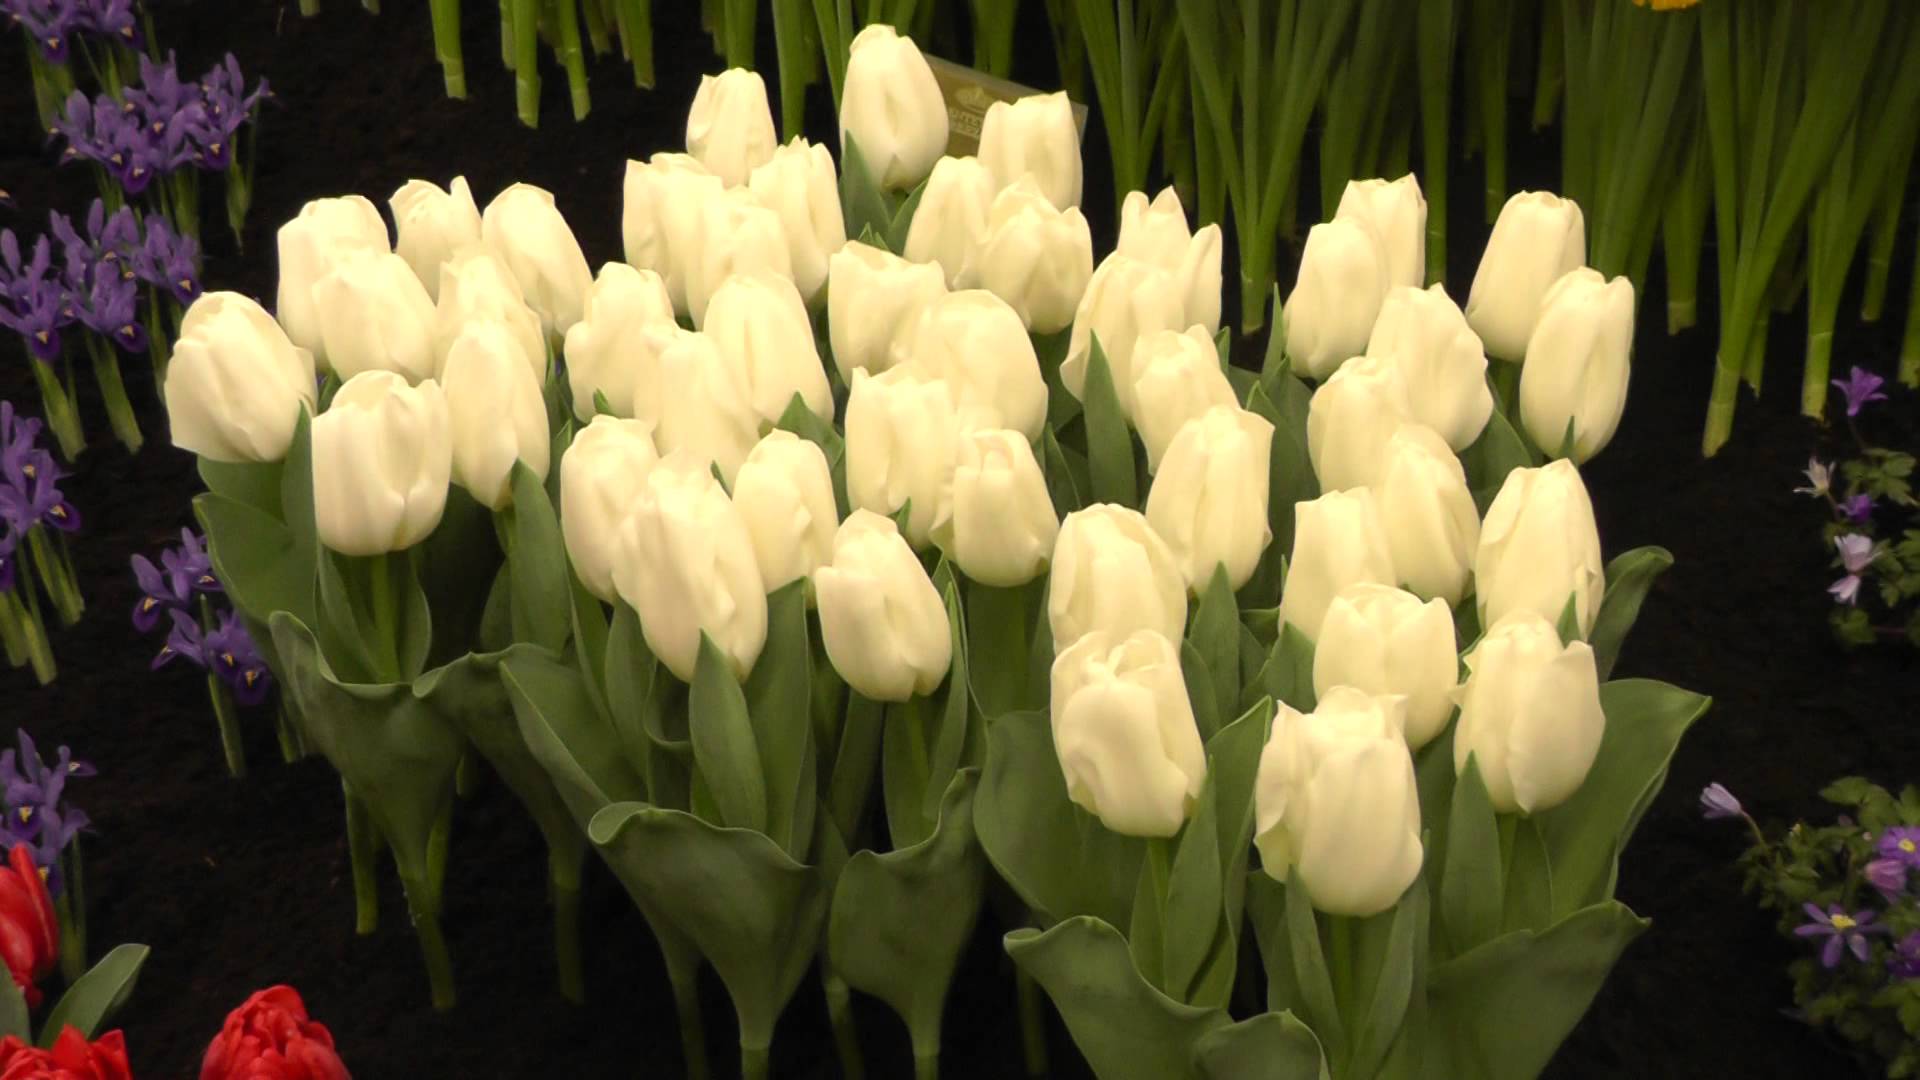 White tulips in a flower bed - Tulip